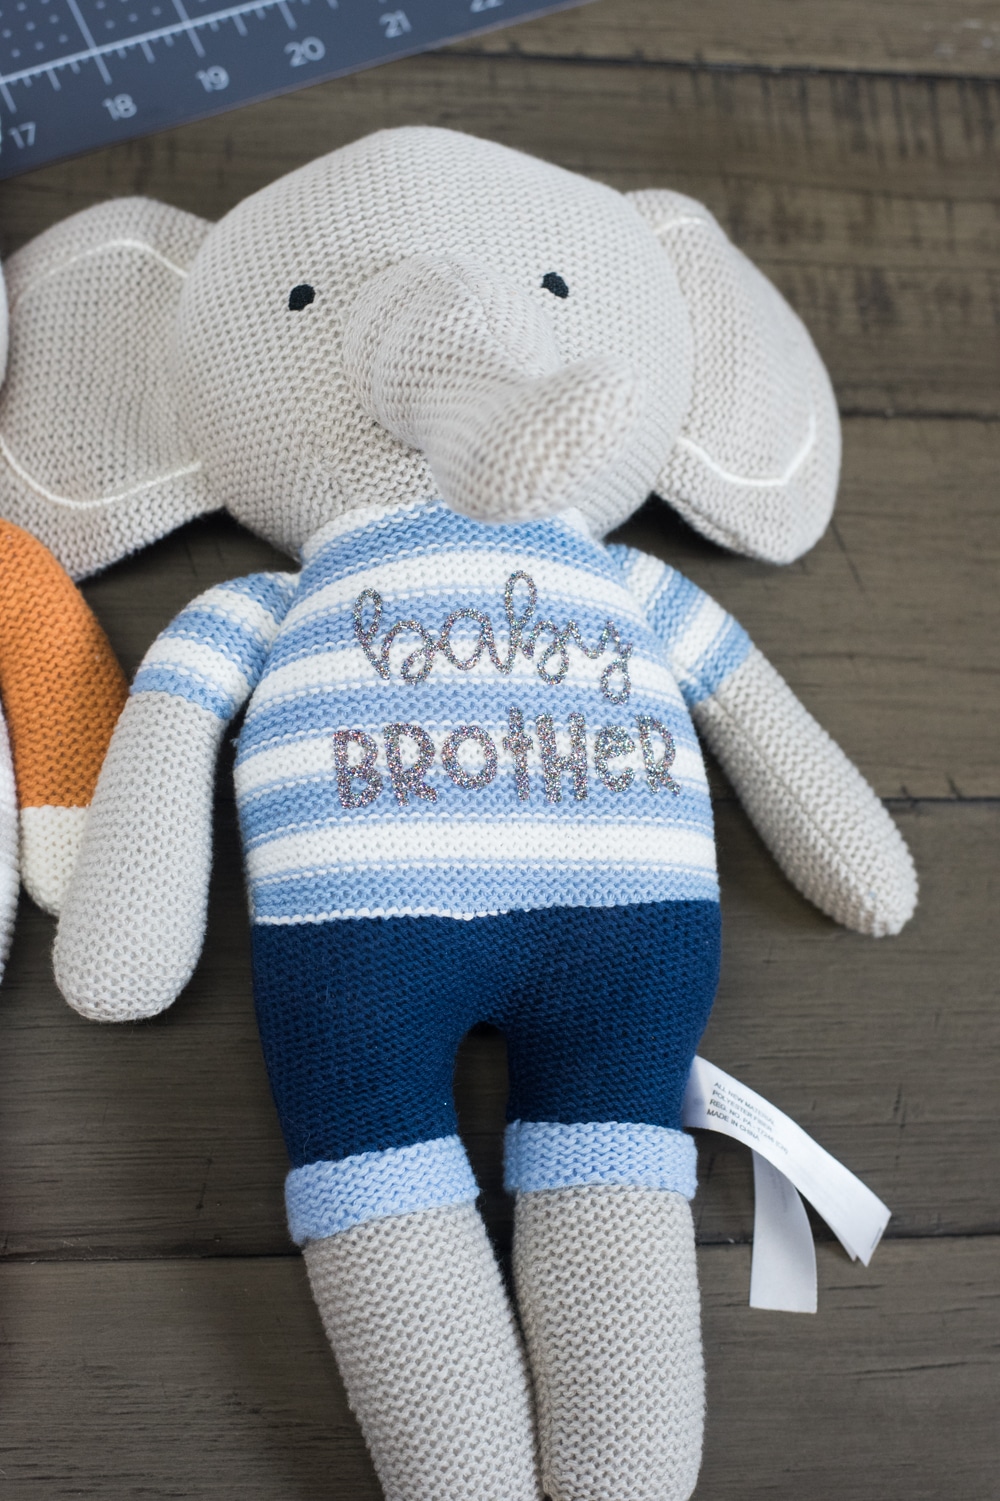 stuffed knit elephant with baby brother on the front in silver